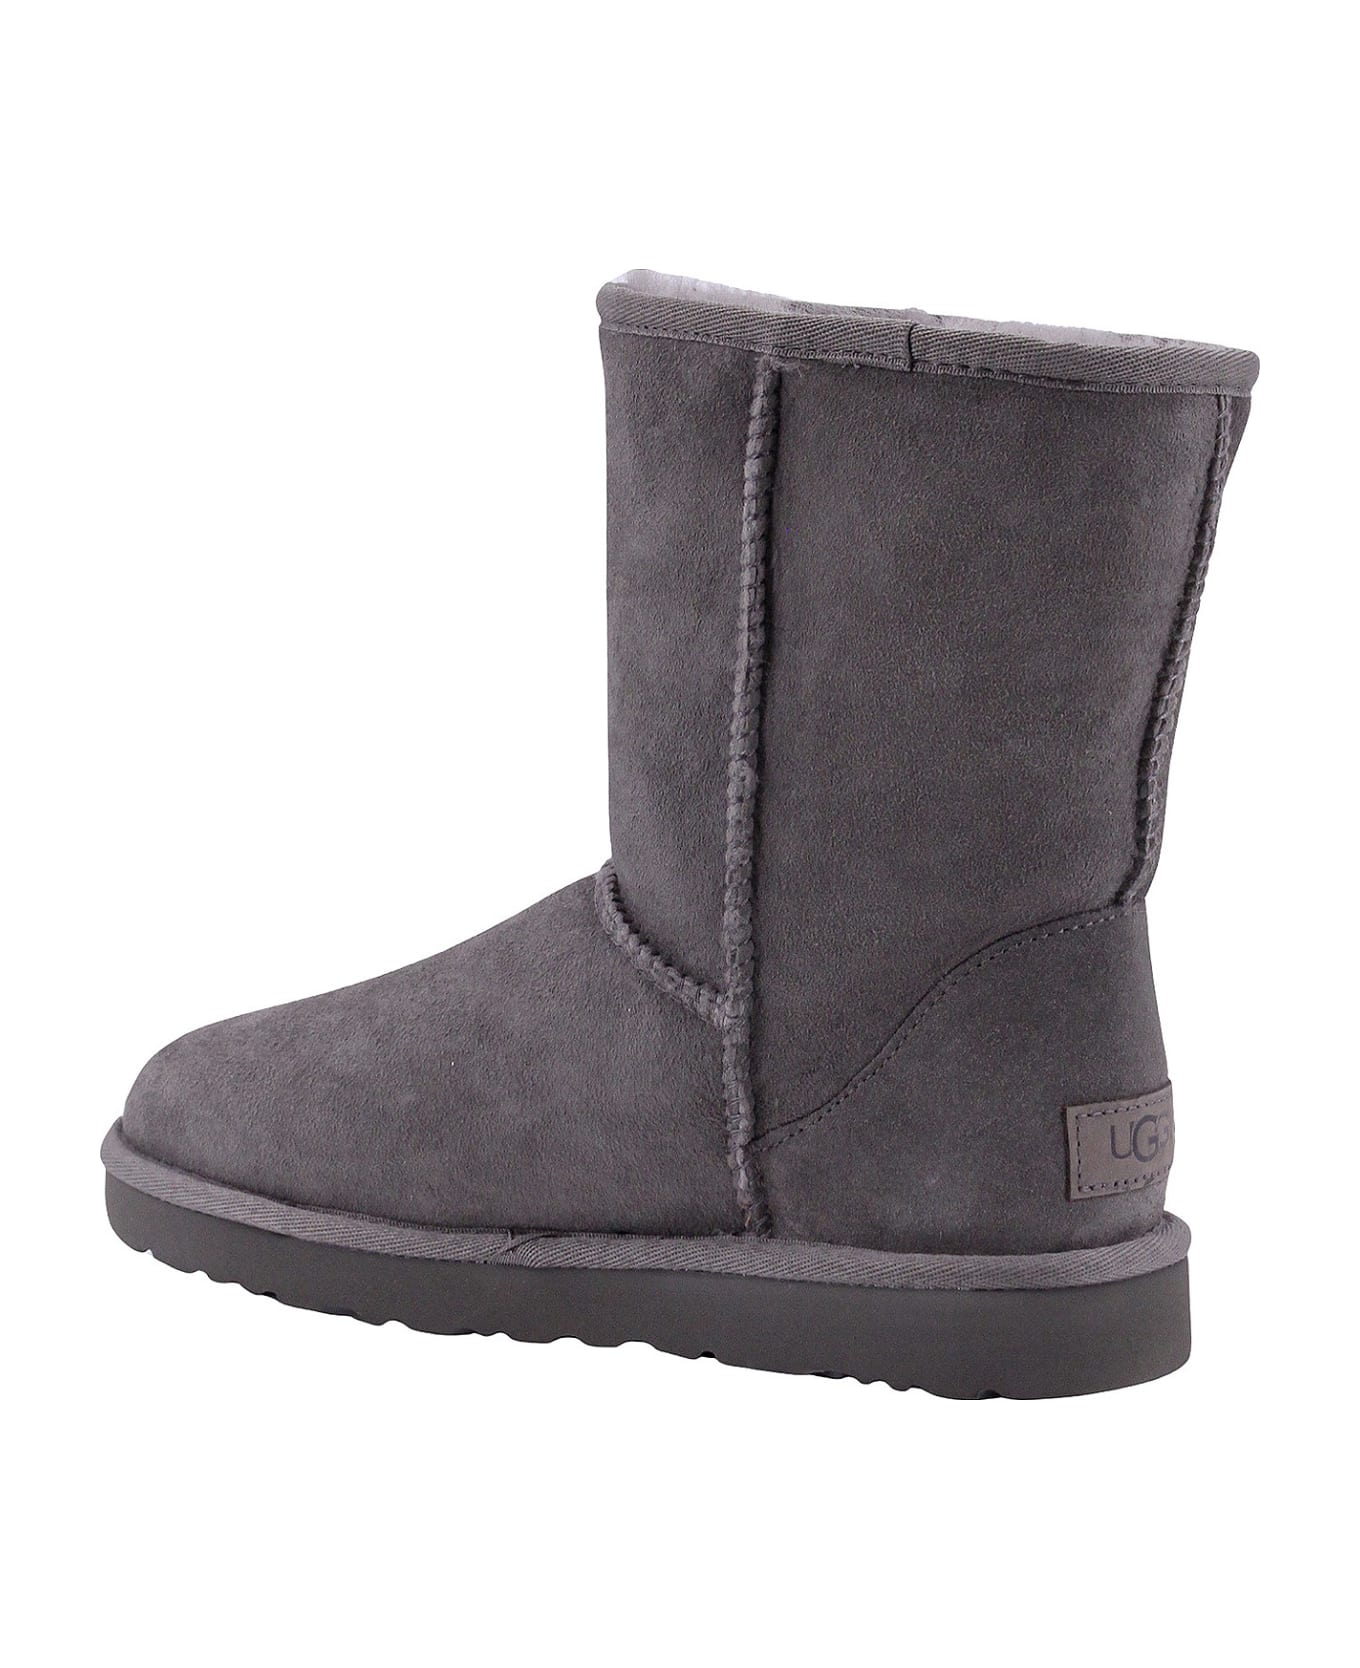 UGG Classic Short Ankle Boots - Grey